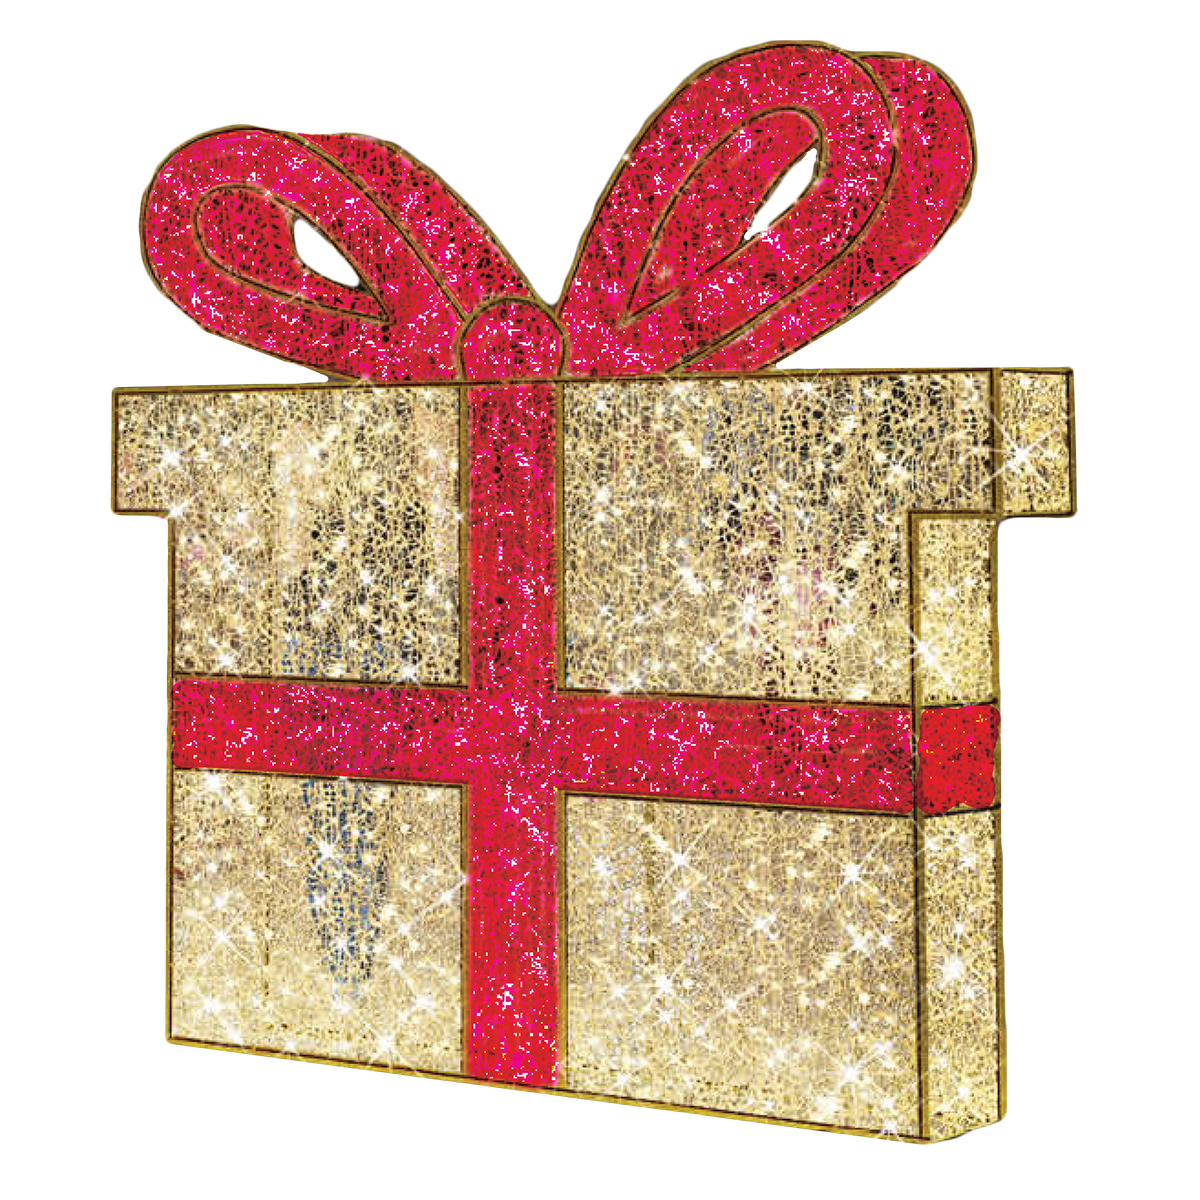 3D Gift Box - Christmas Display - Gold/Red - Warm White LEDs - Medium - 6.5ft tall